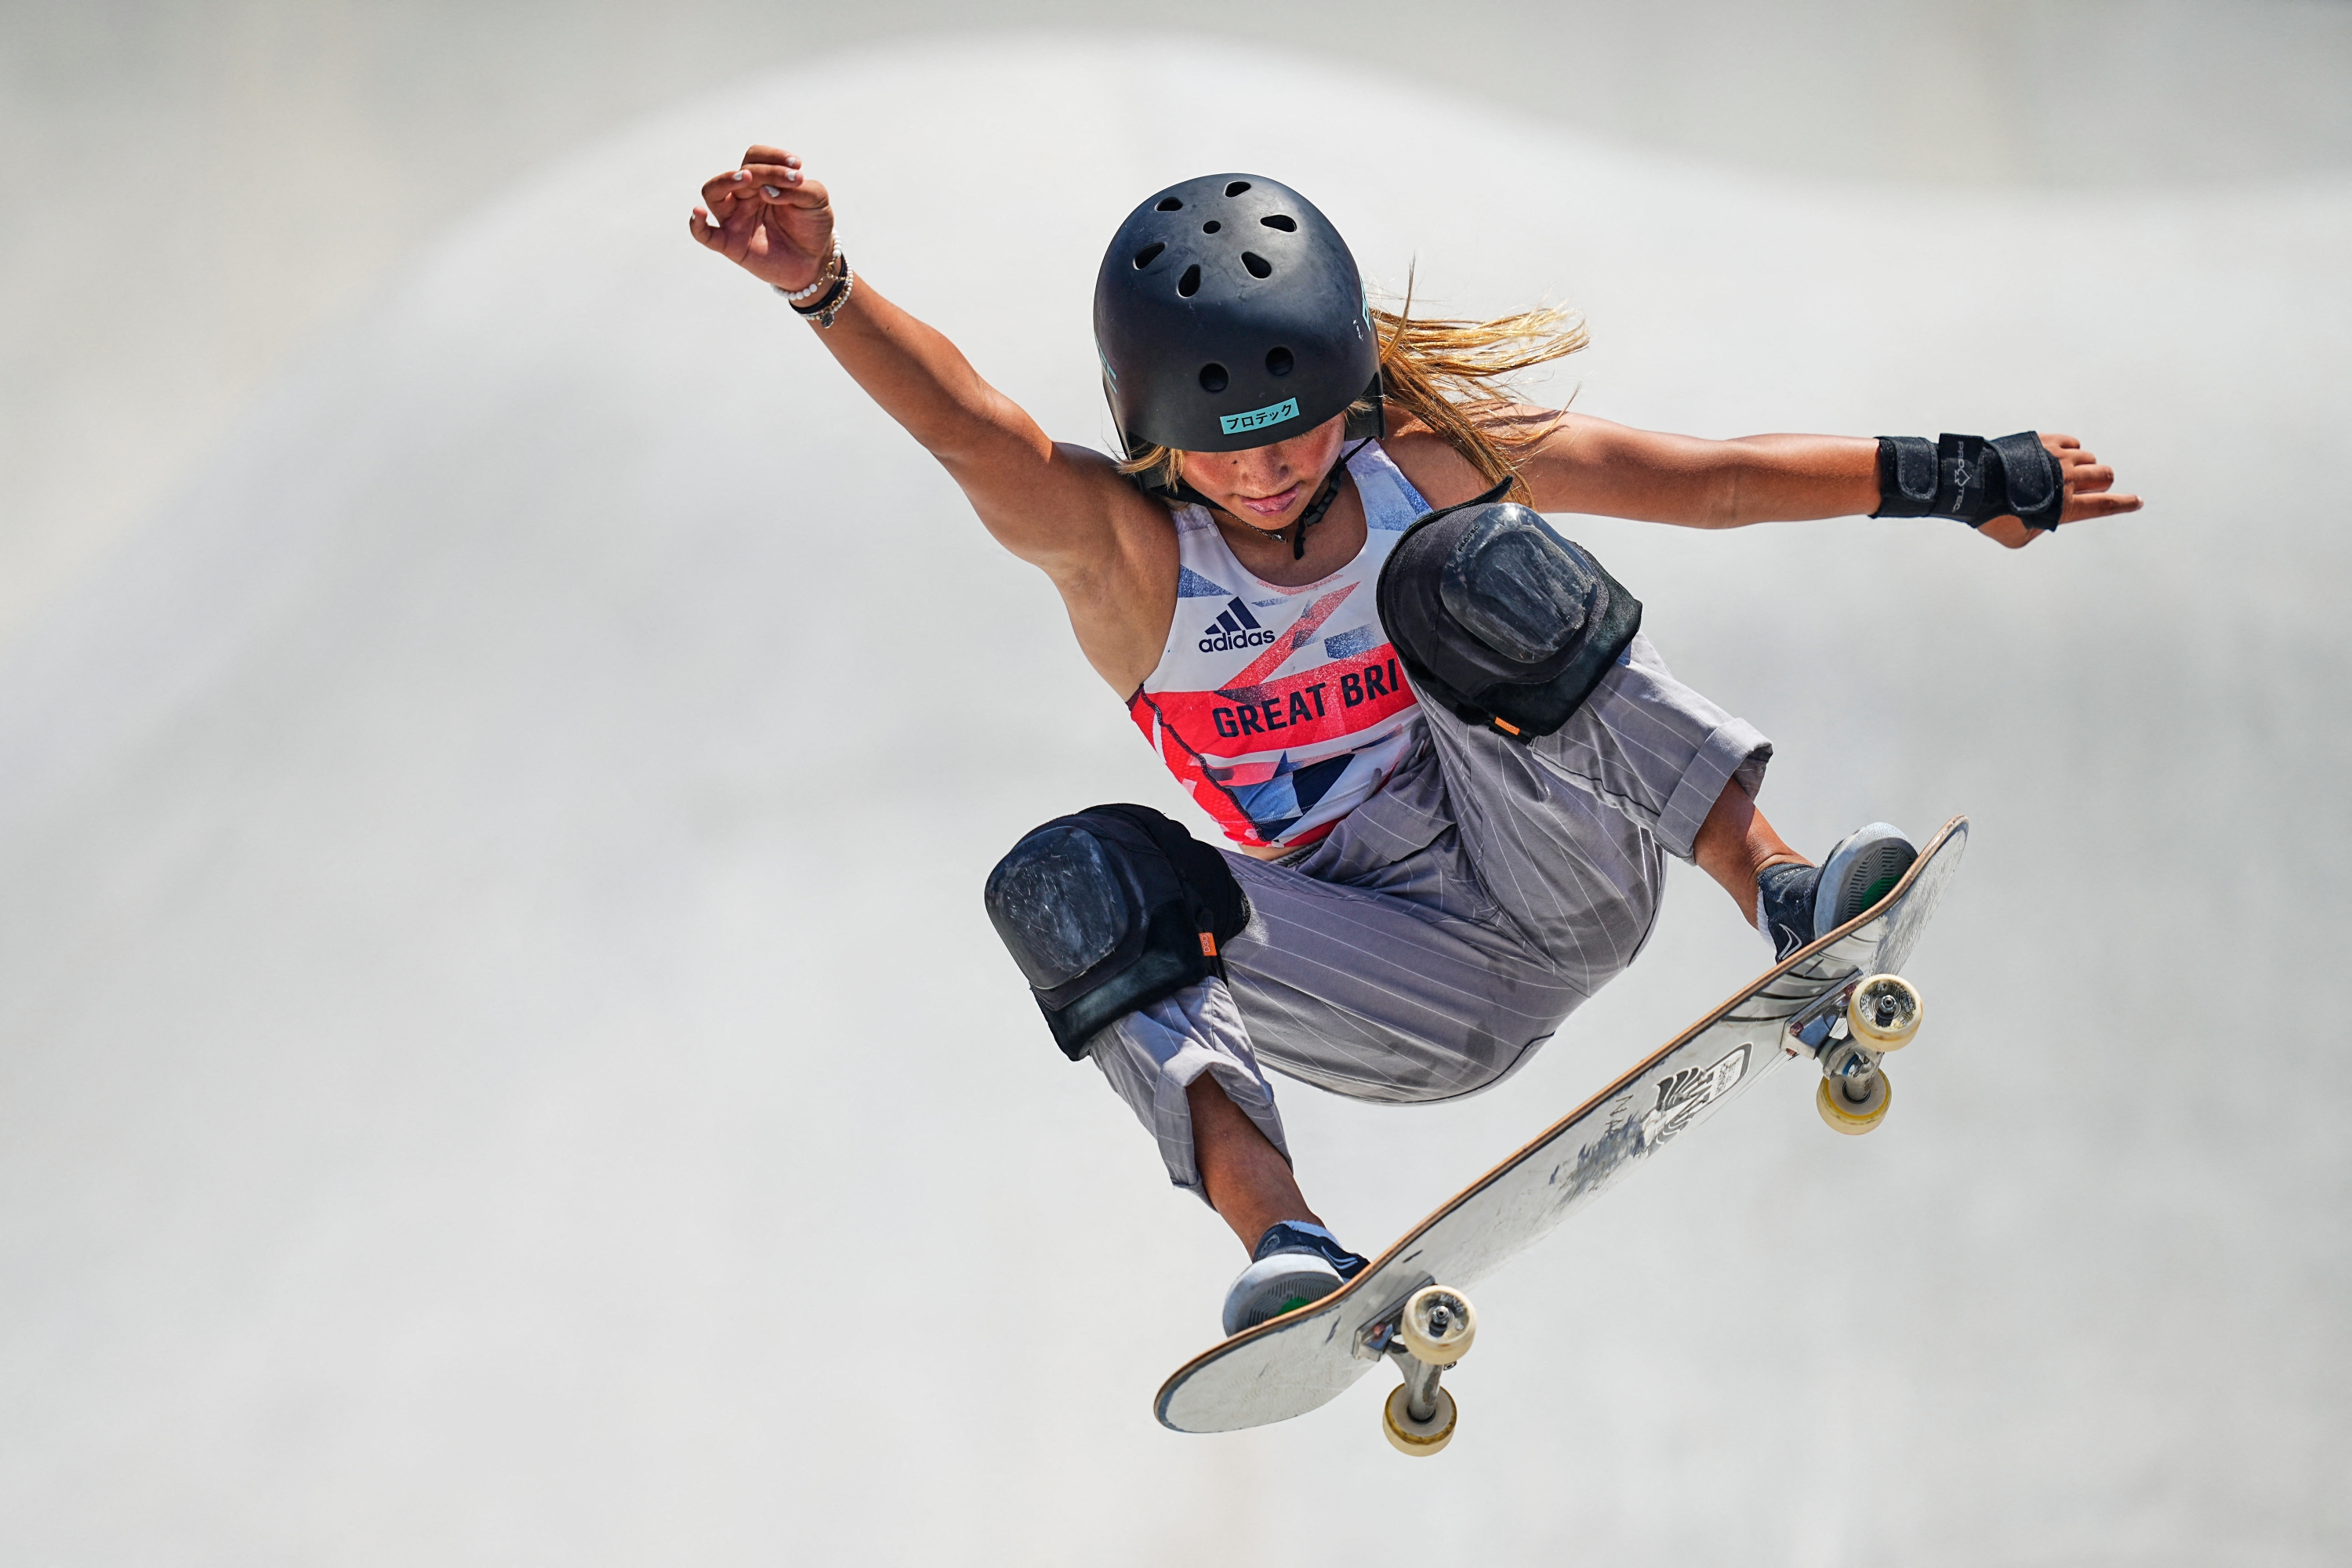 Sky Brown from Great Britain during women's park skateboard at the Olympics at Ariake Urban Park, Tokyo, Japan on August 4, 2021. (Photo by Ulrik Pedersen/NurPhoto) (Photo by Ulrik Pedersen / NurPhoto / NurPhoto via AFP)